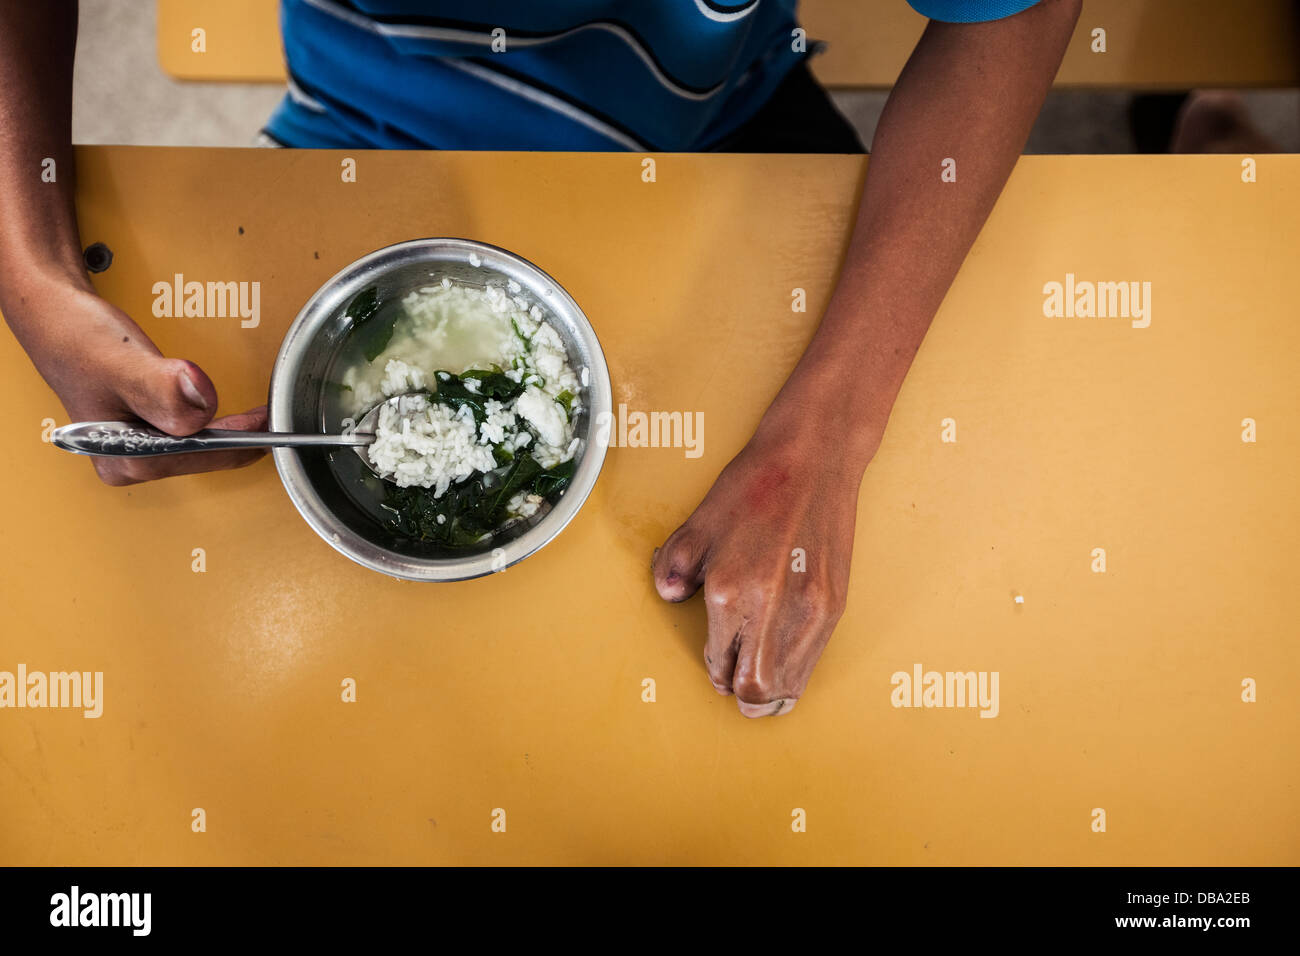 A young child with deformed hands eating in Danang, Vietnam. Stock Photo